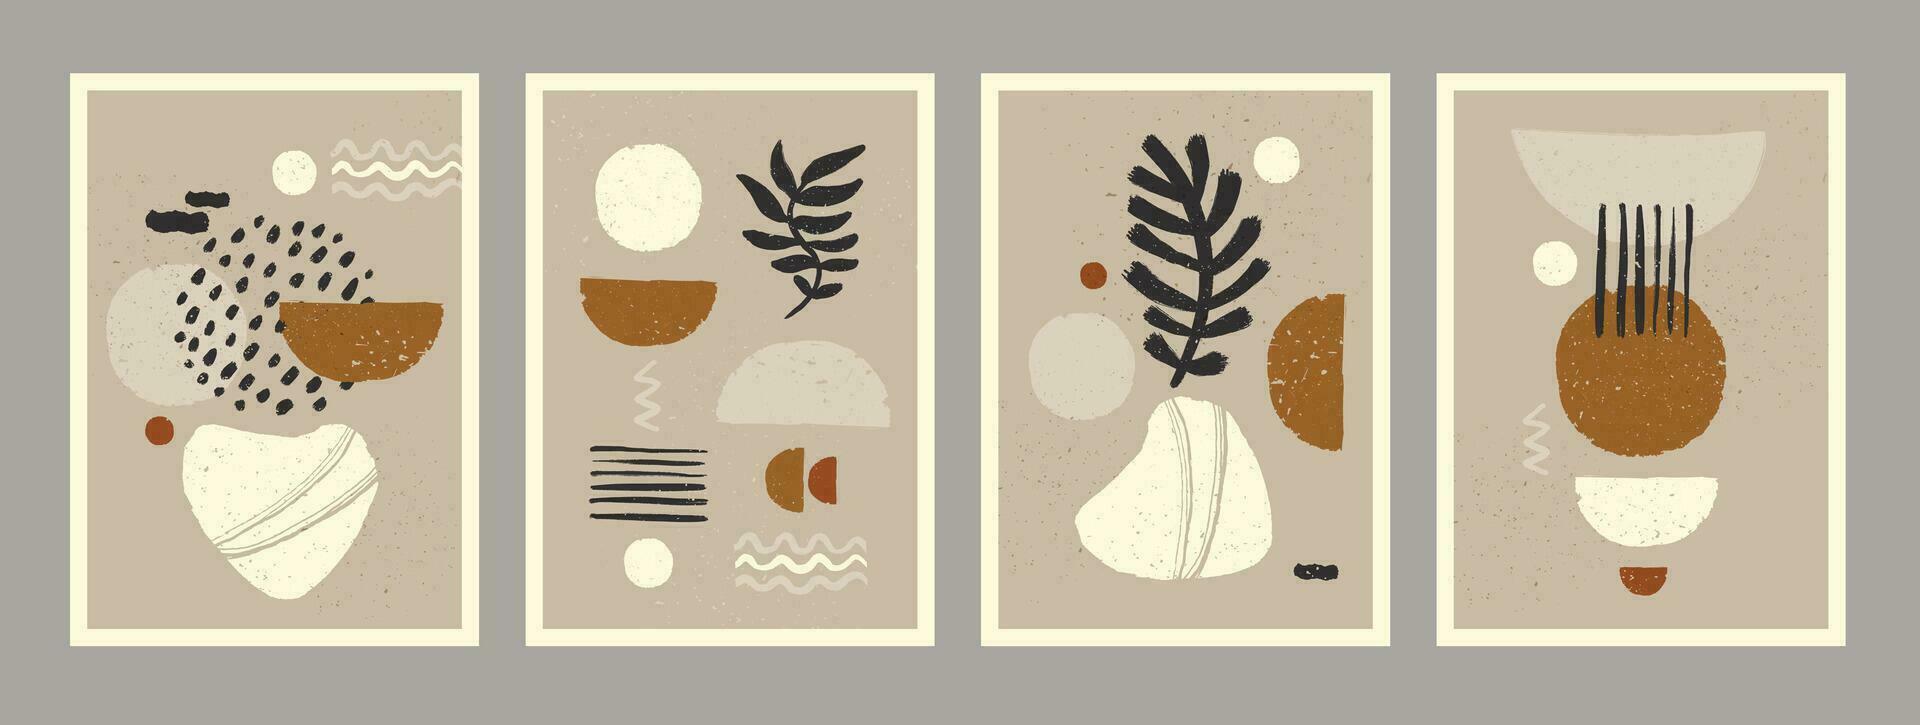 Abstract art minimalist posters set. Scandinavian abstract organic composition in natural earthy colors for wall decoration. Vector hand-painted illustration.